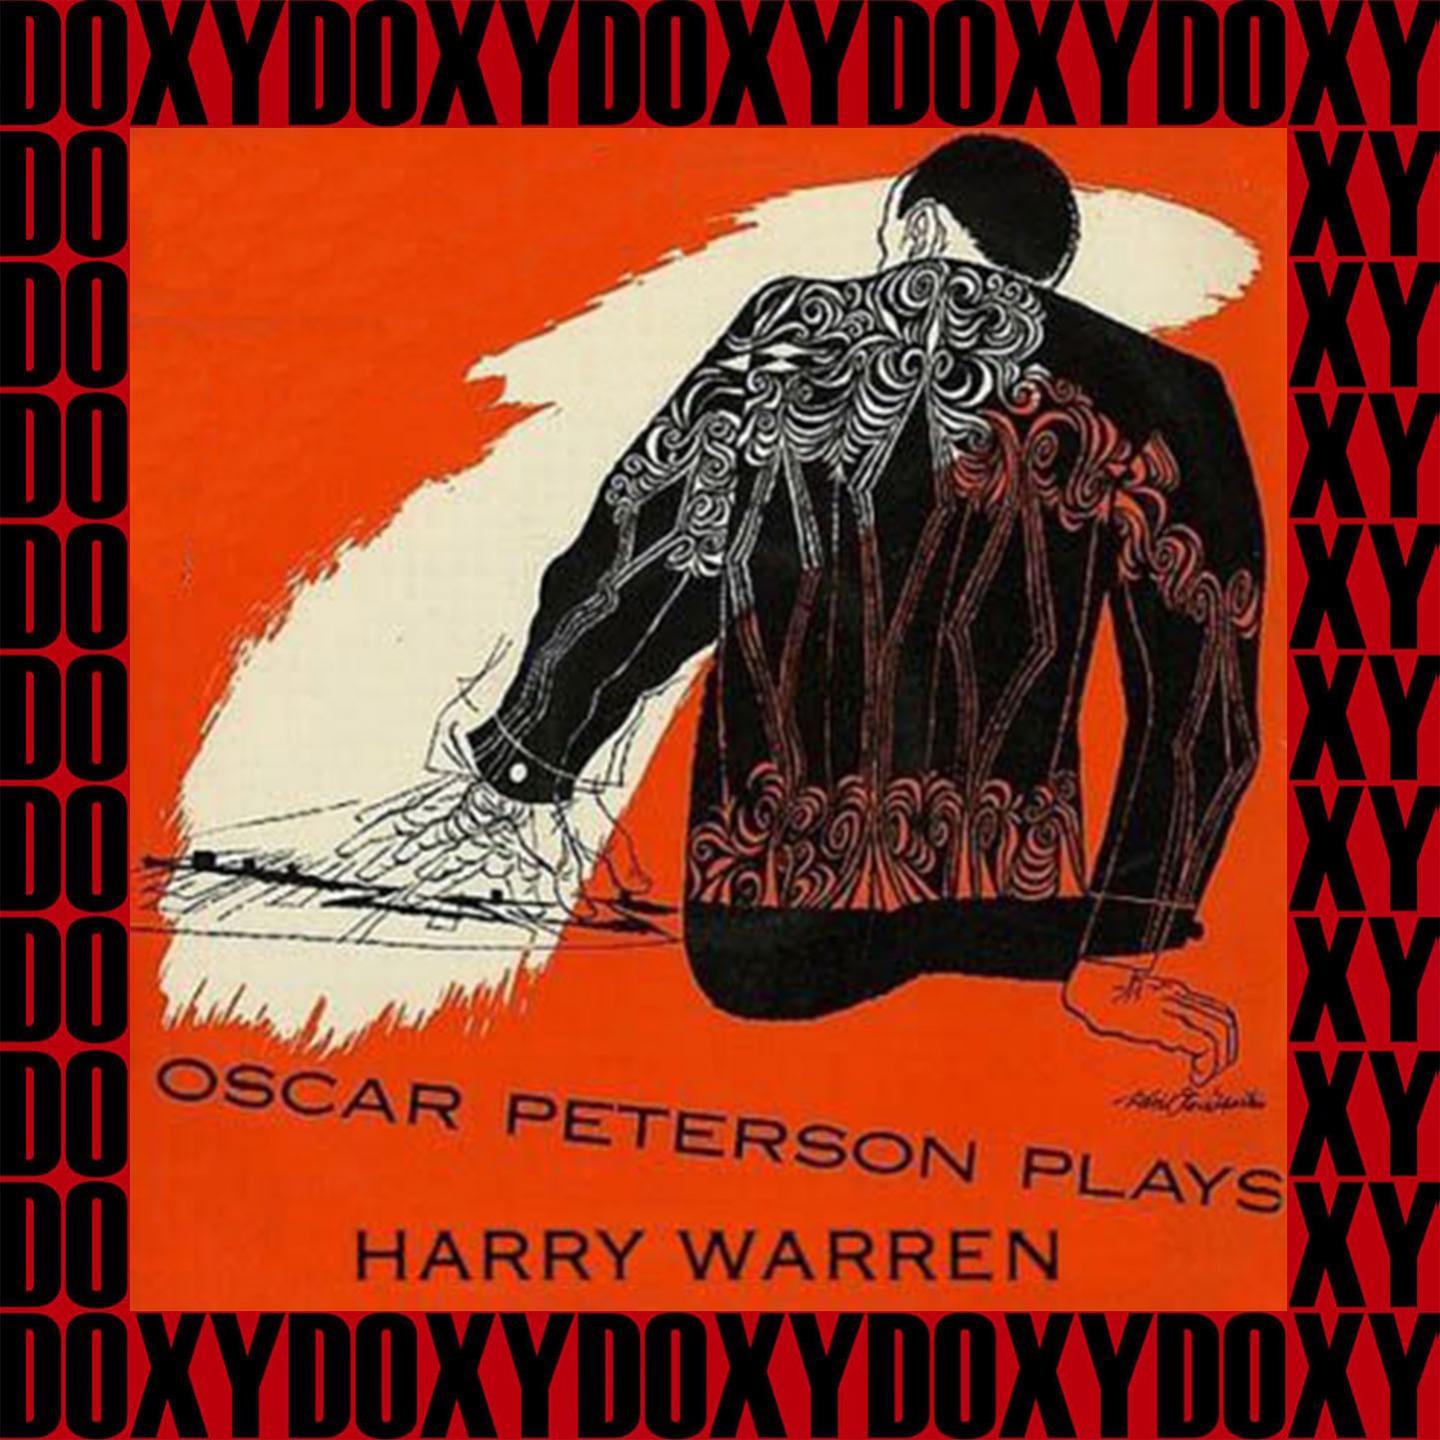 Oscar Peterson Plays Harry Warren (Remastered Version) (Doxy Collection)专辑